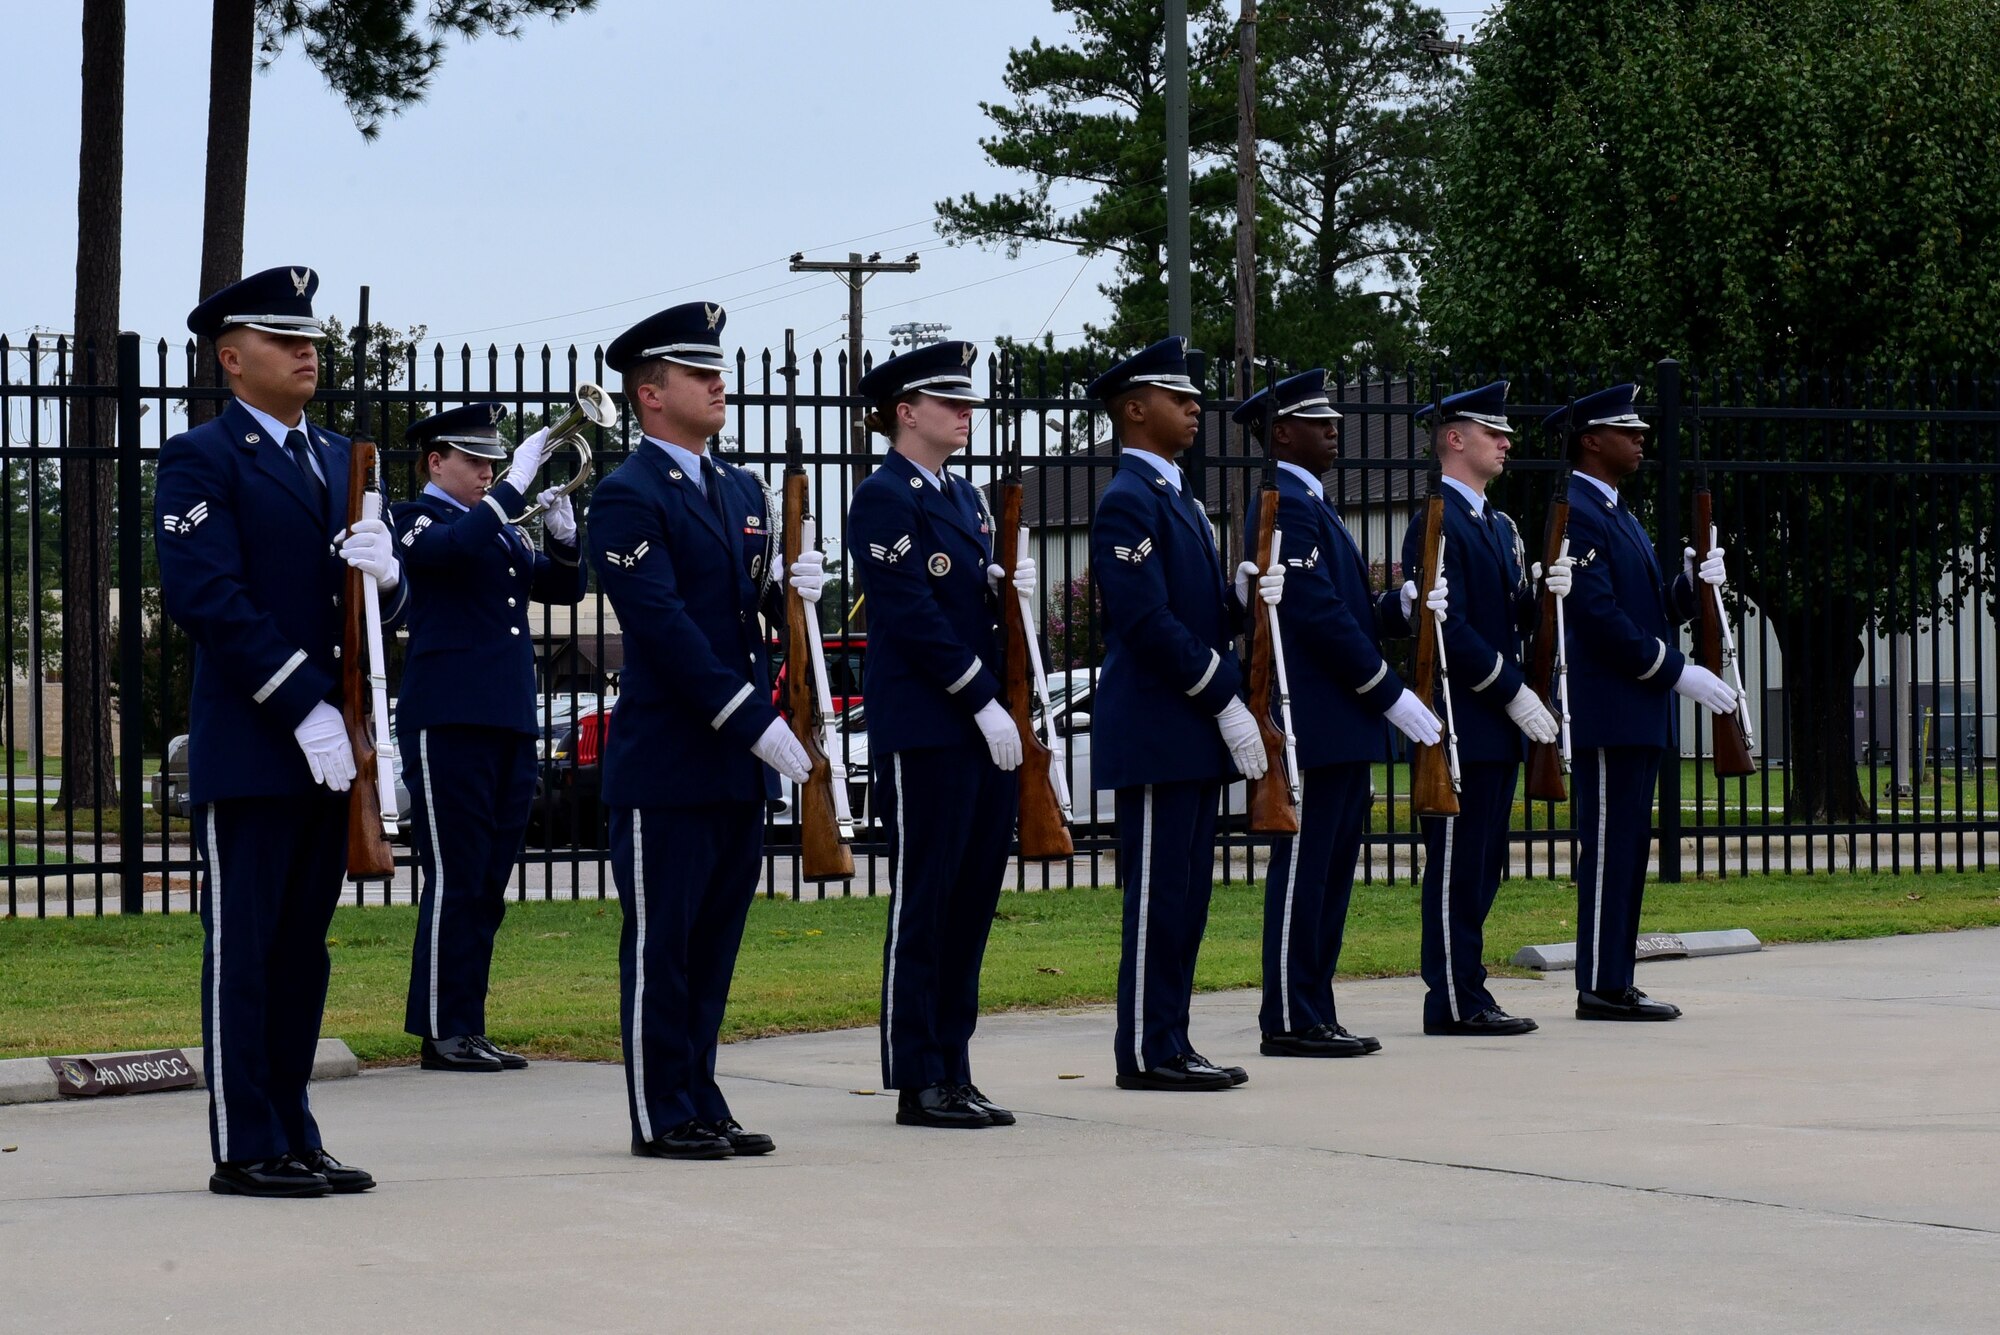 Members of the 4th Fighter Wing honor guard present a 21-gun salute and a bugle playing of TAPS during a 9/11 Remembrance Ceremony, Sept. 11, 2017, at Seymour Johnson Air Force Base, North Carolina. Approximately 100 base members came to pay their respects during the ceremony. (U.S. Air Force photo by Airman 1st Class Victoria Boyton)